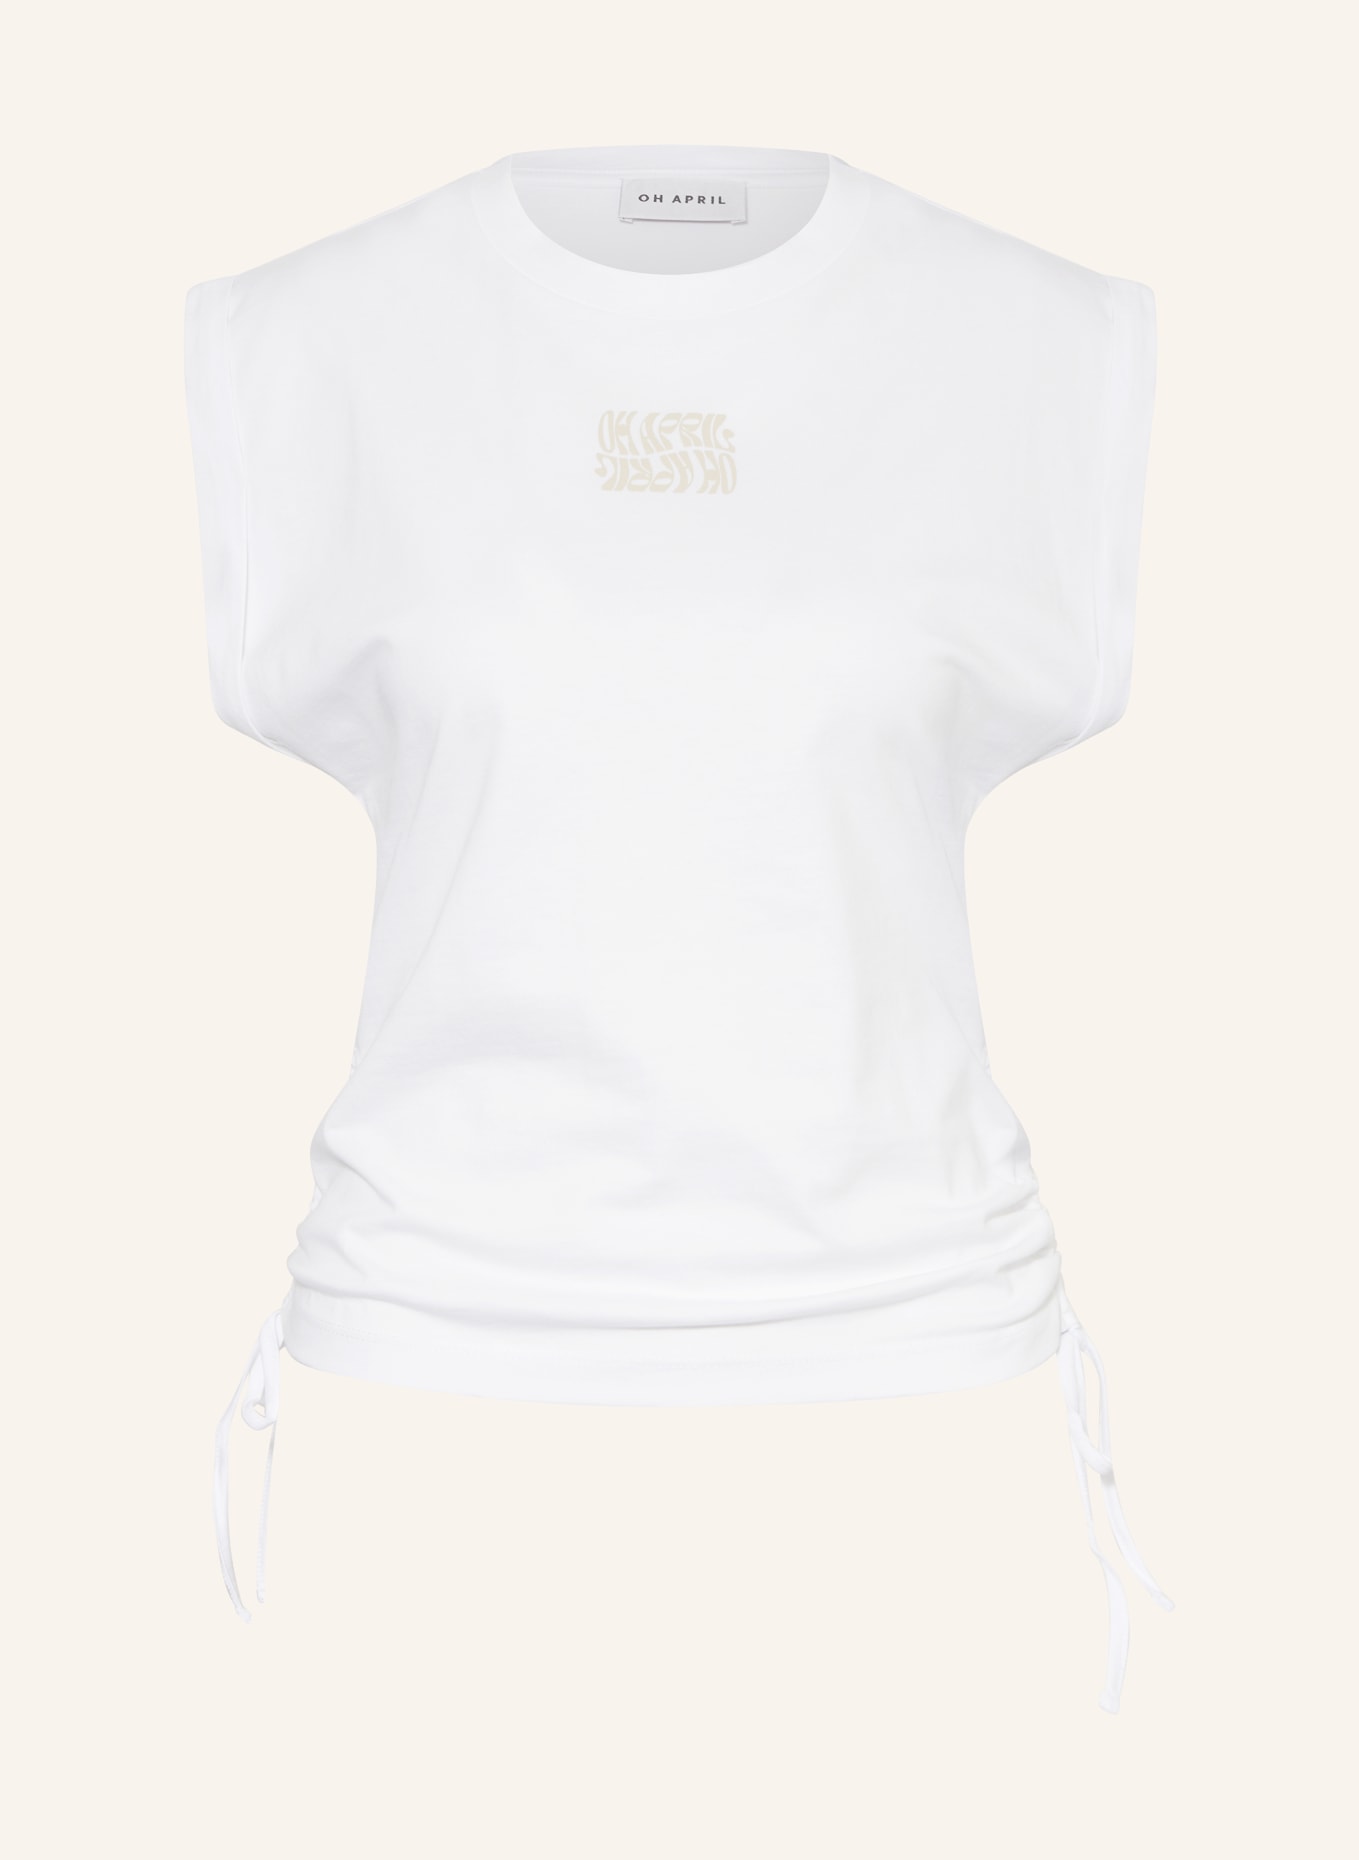 OH APRIL Top, Color: WHITE (Image 1)